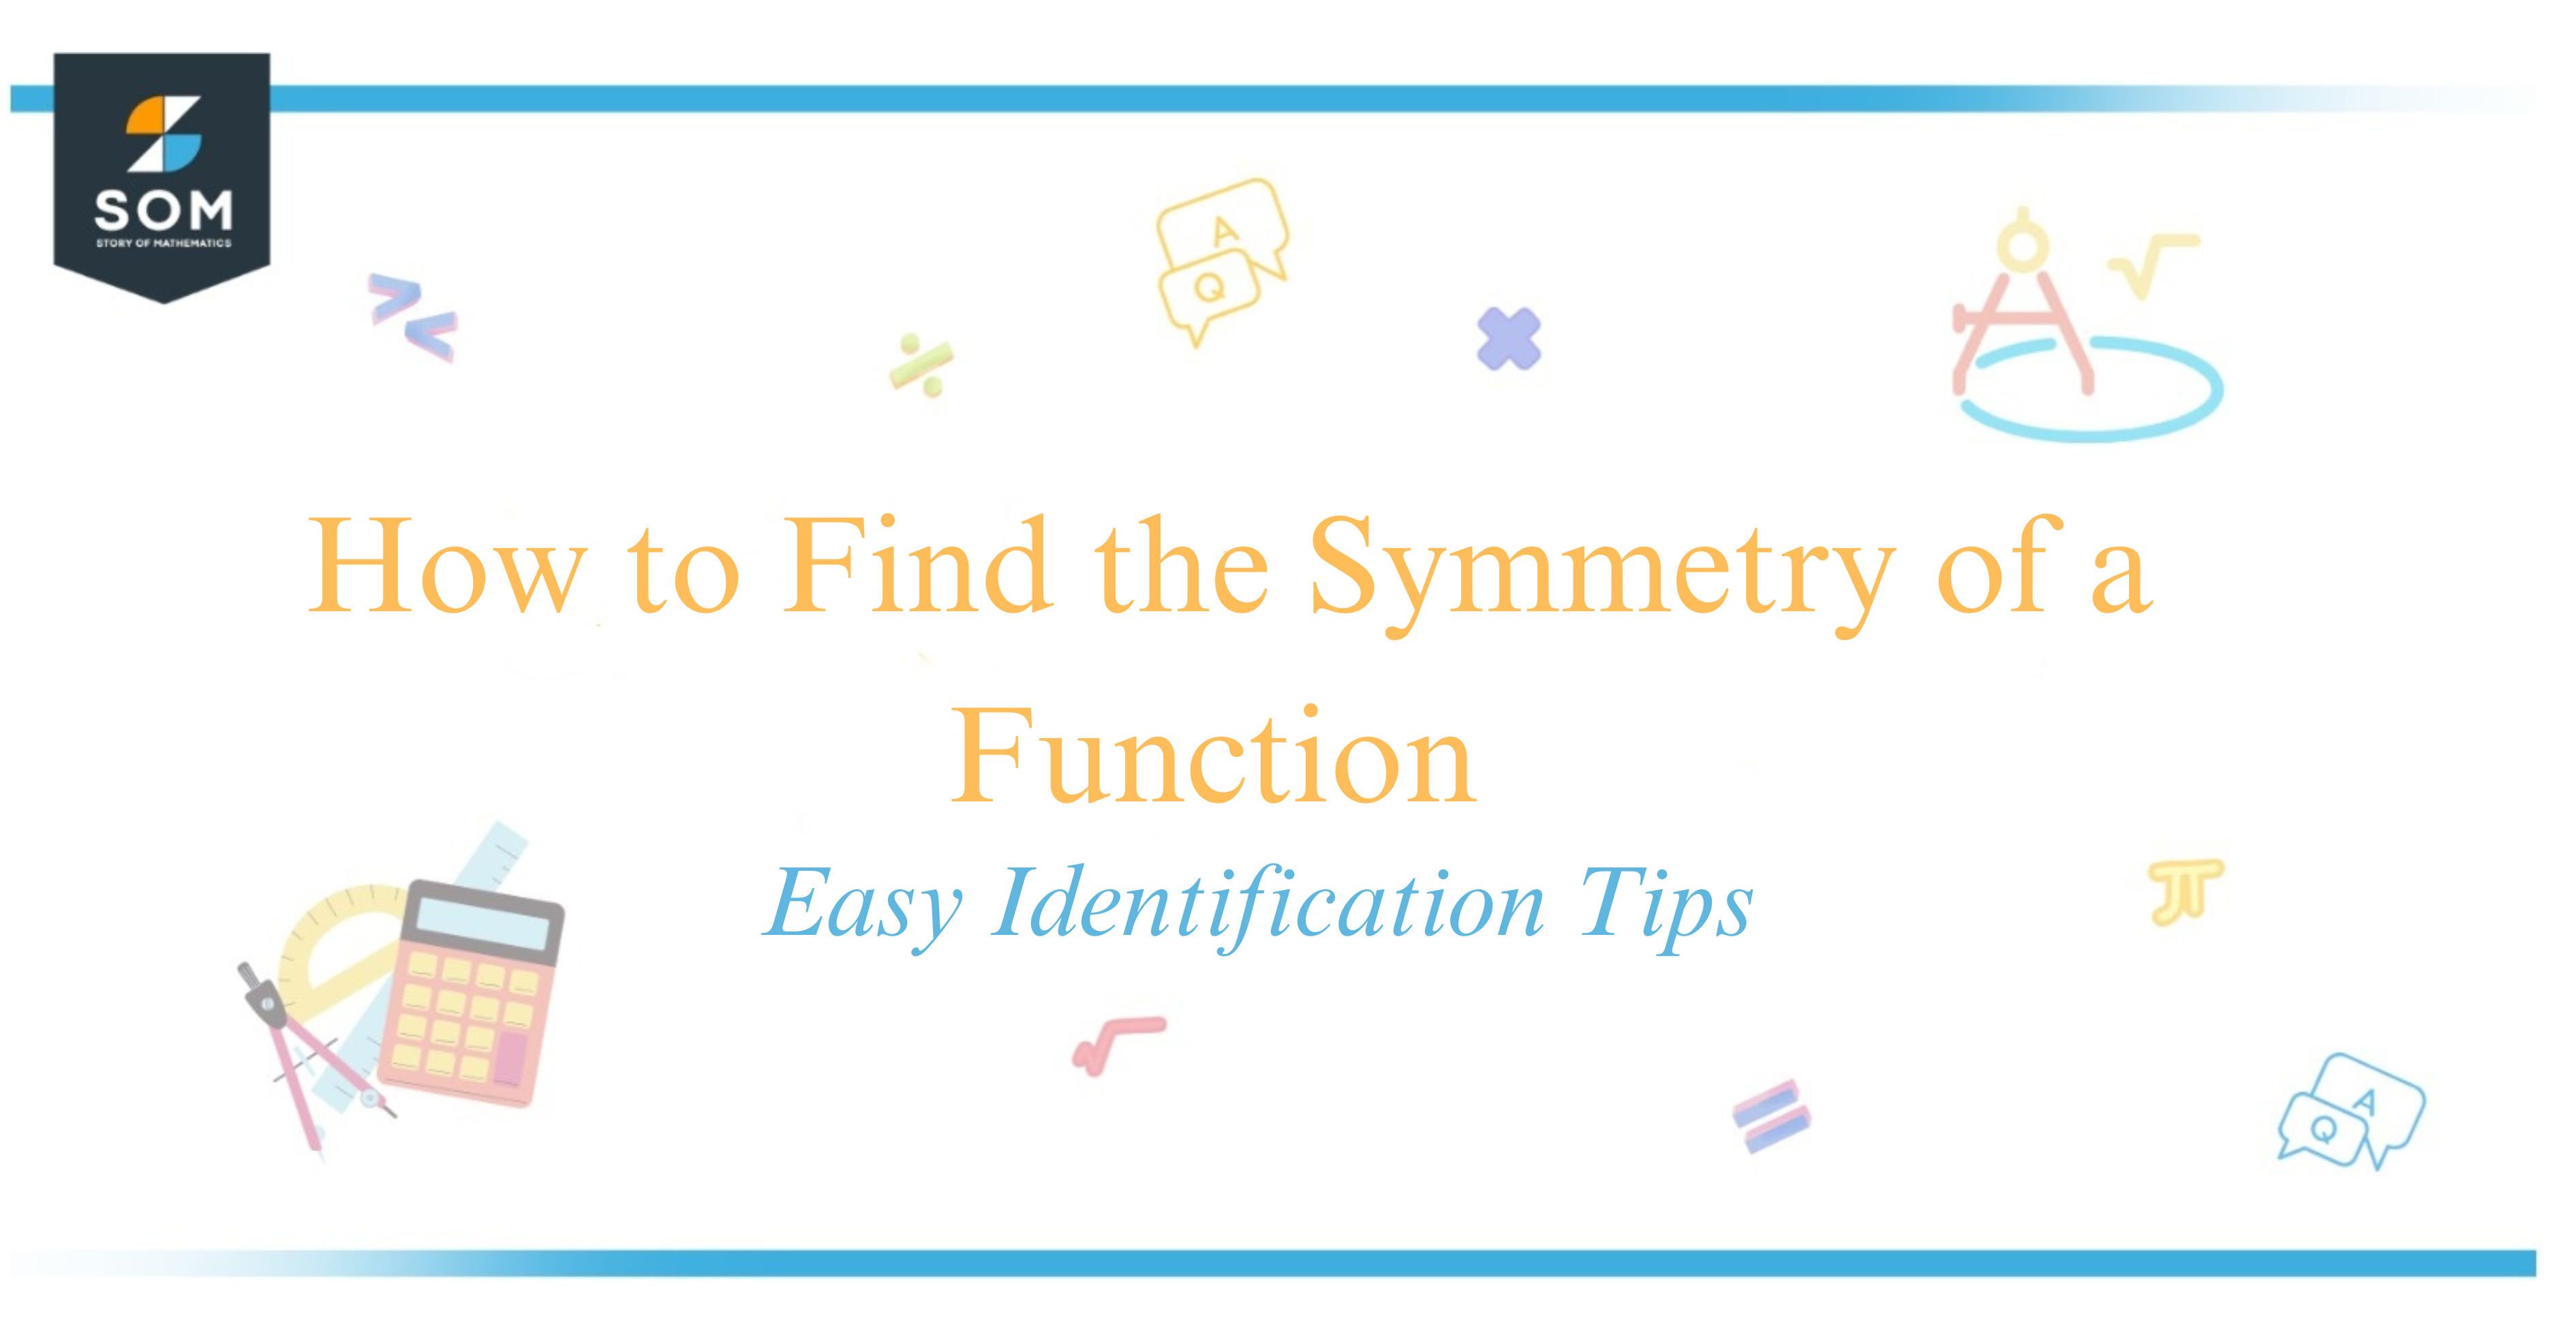 How to Find the Symmetry of a Function Easy Identification Tips